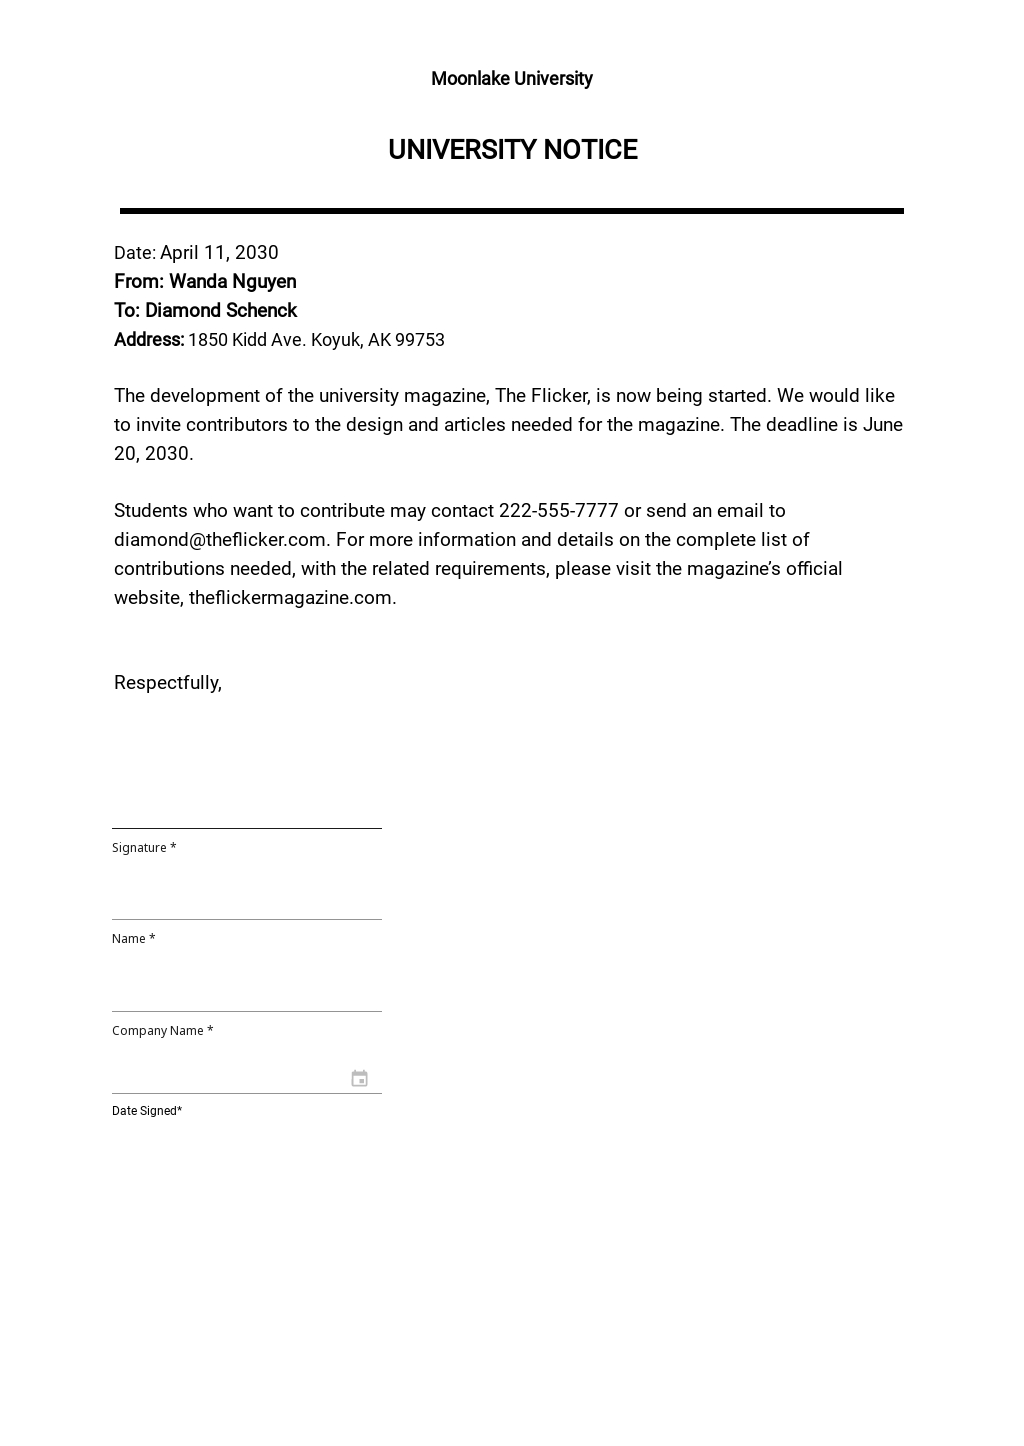 assignment notice letter